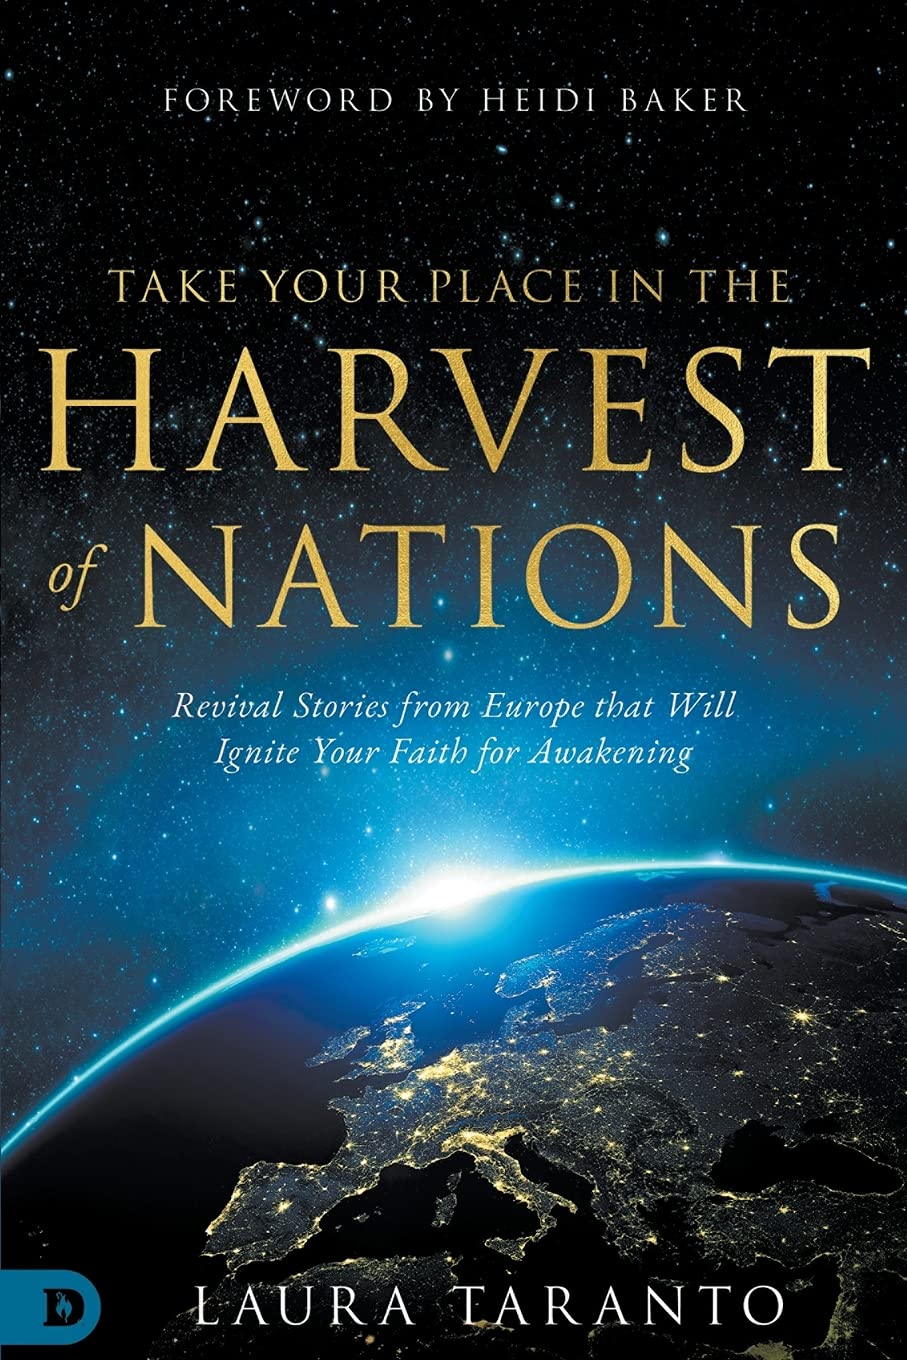 TAKE YOUR PLACE IN THE HARVEST OF NATIONS